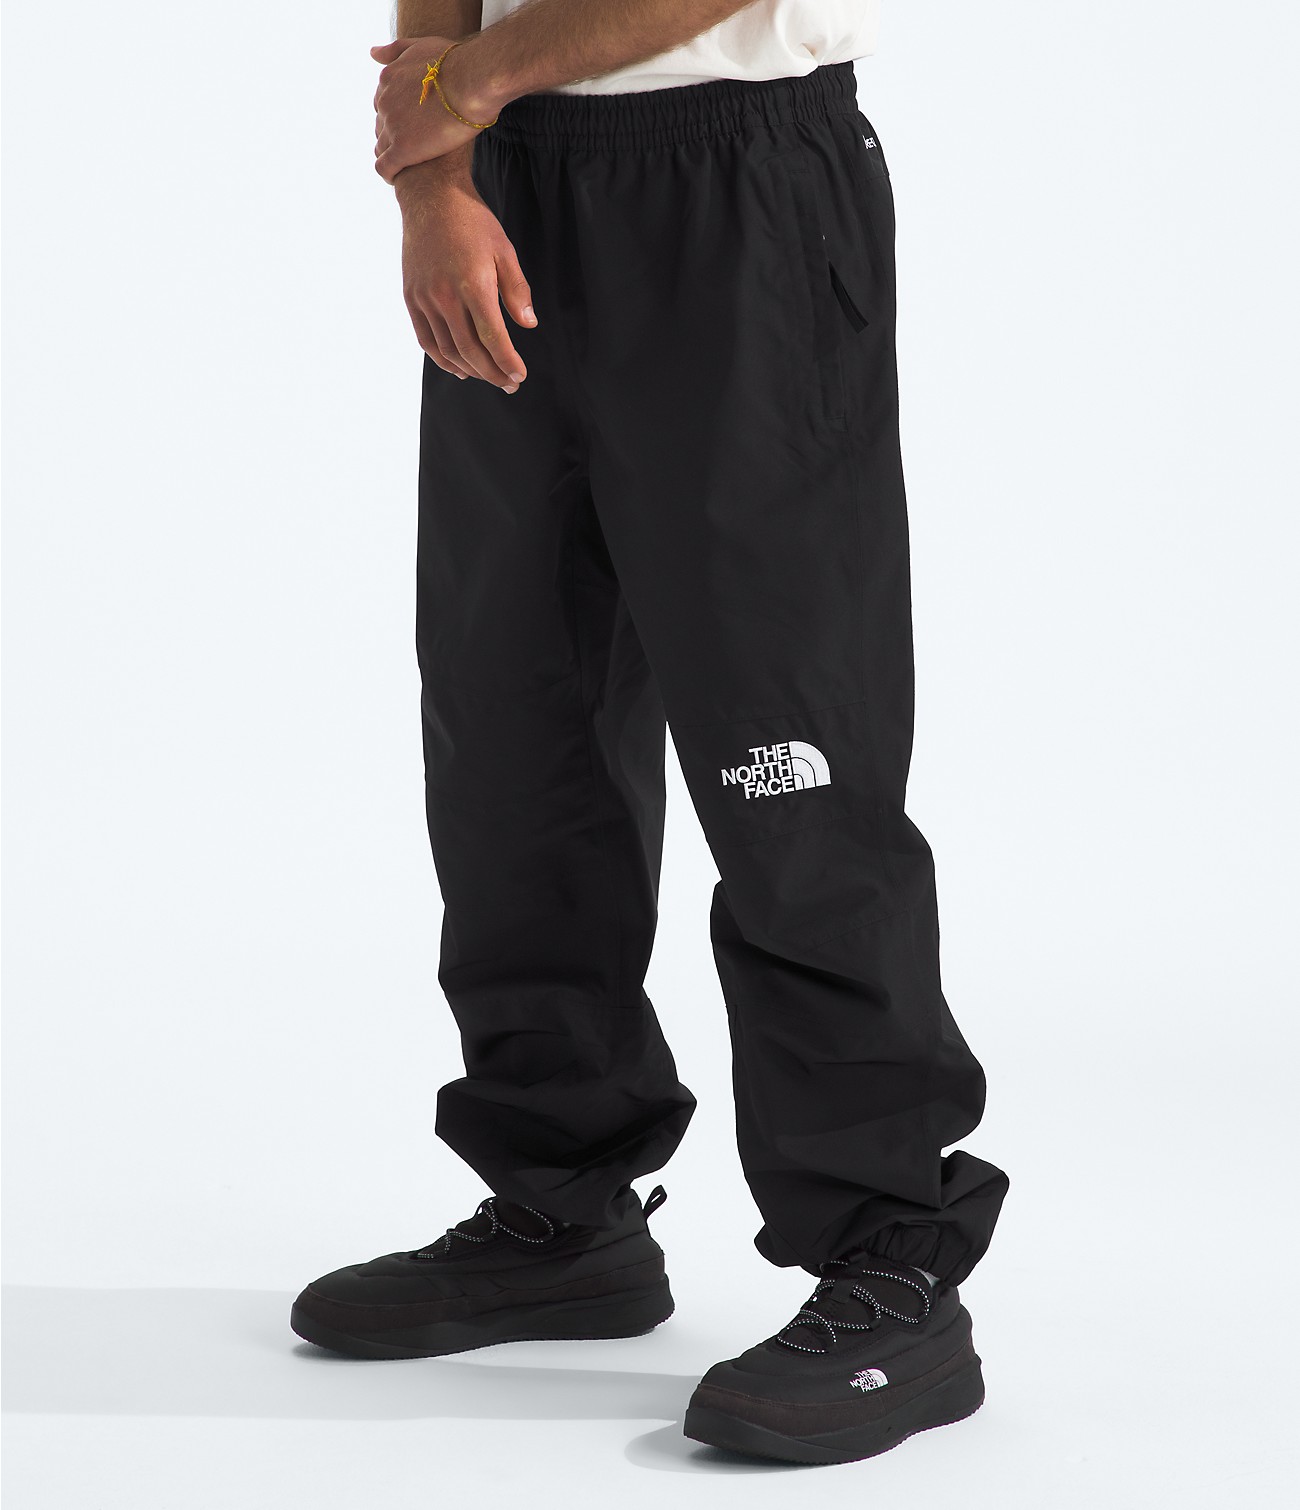 Men’s GORE-TEX® Mountain Pants | The North Face